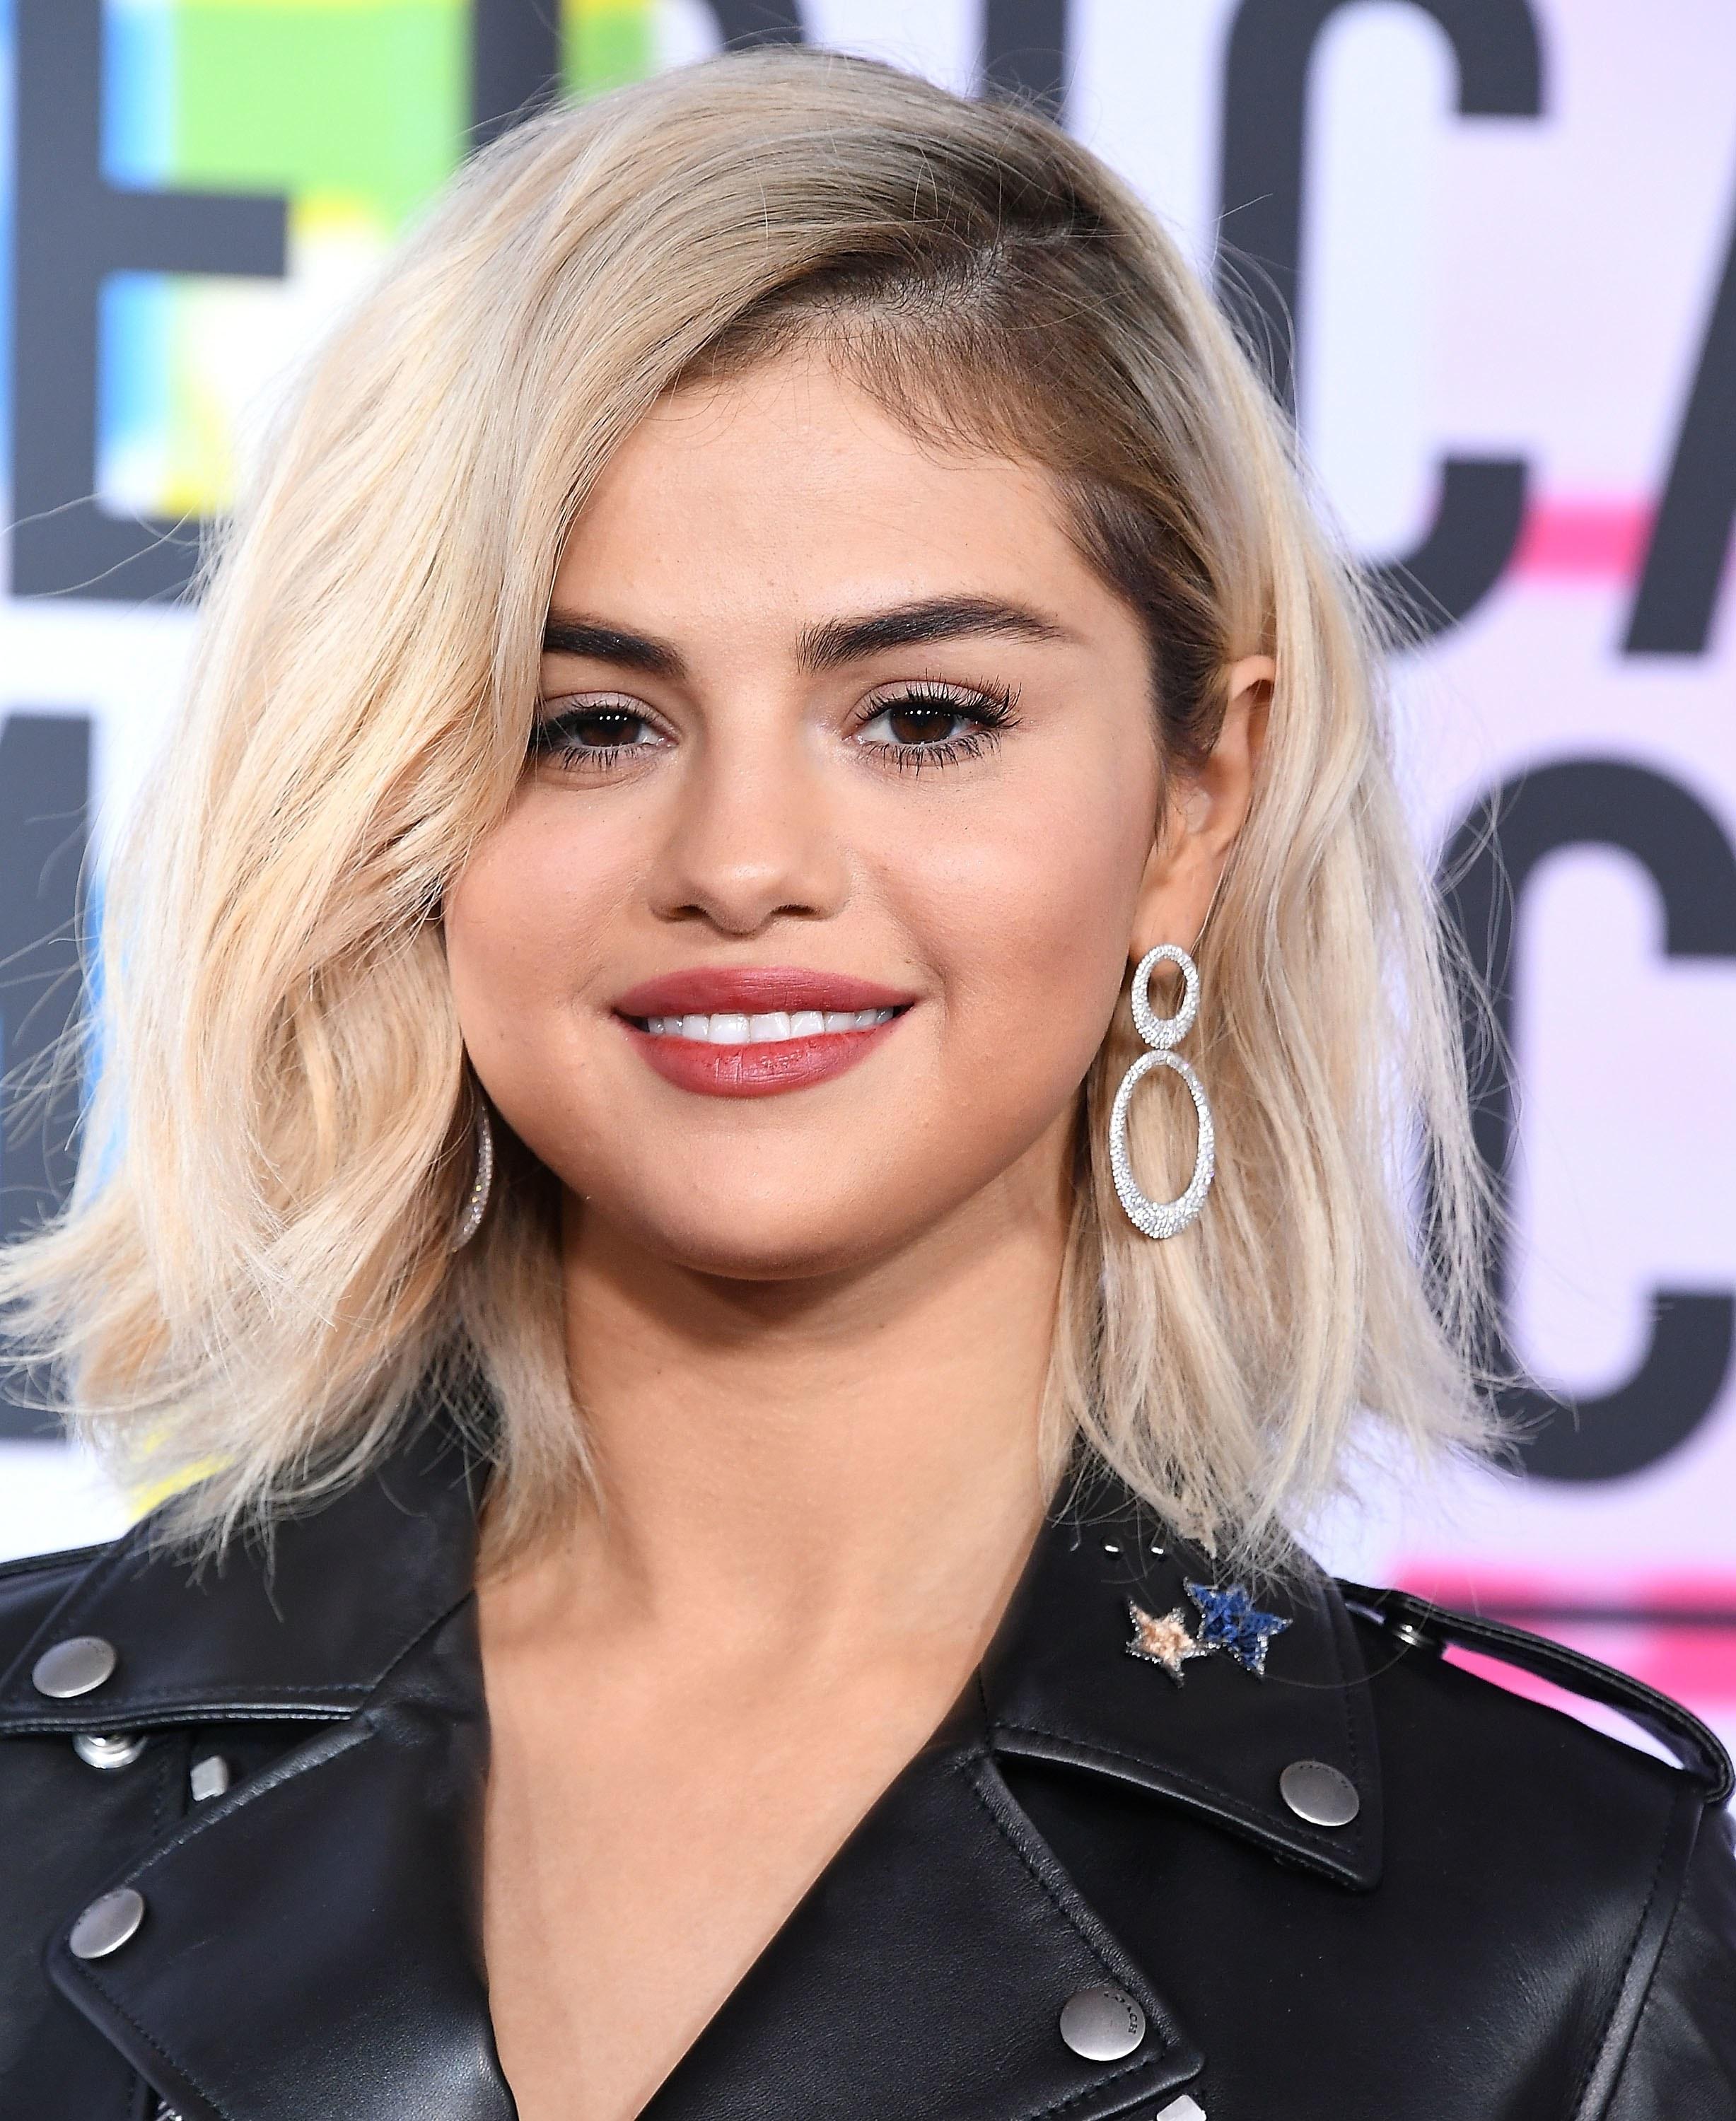 Selena Gomez's Blond Hair Took an Insane Amount of Time to